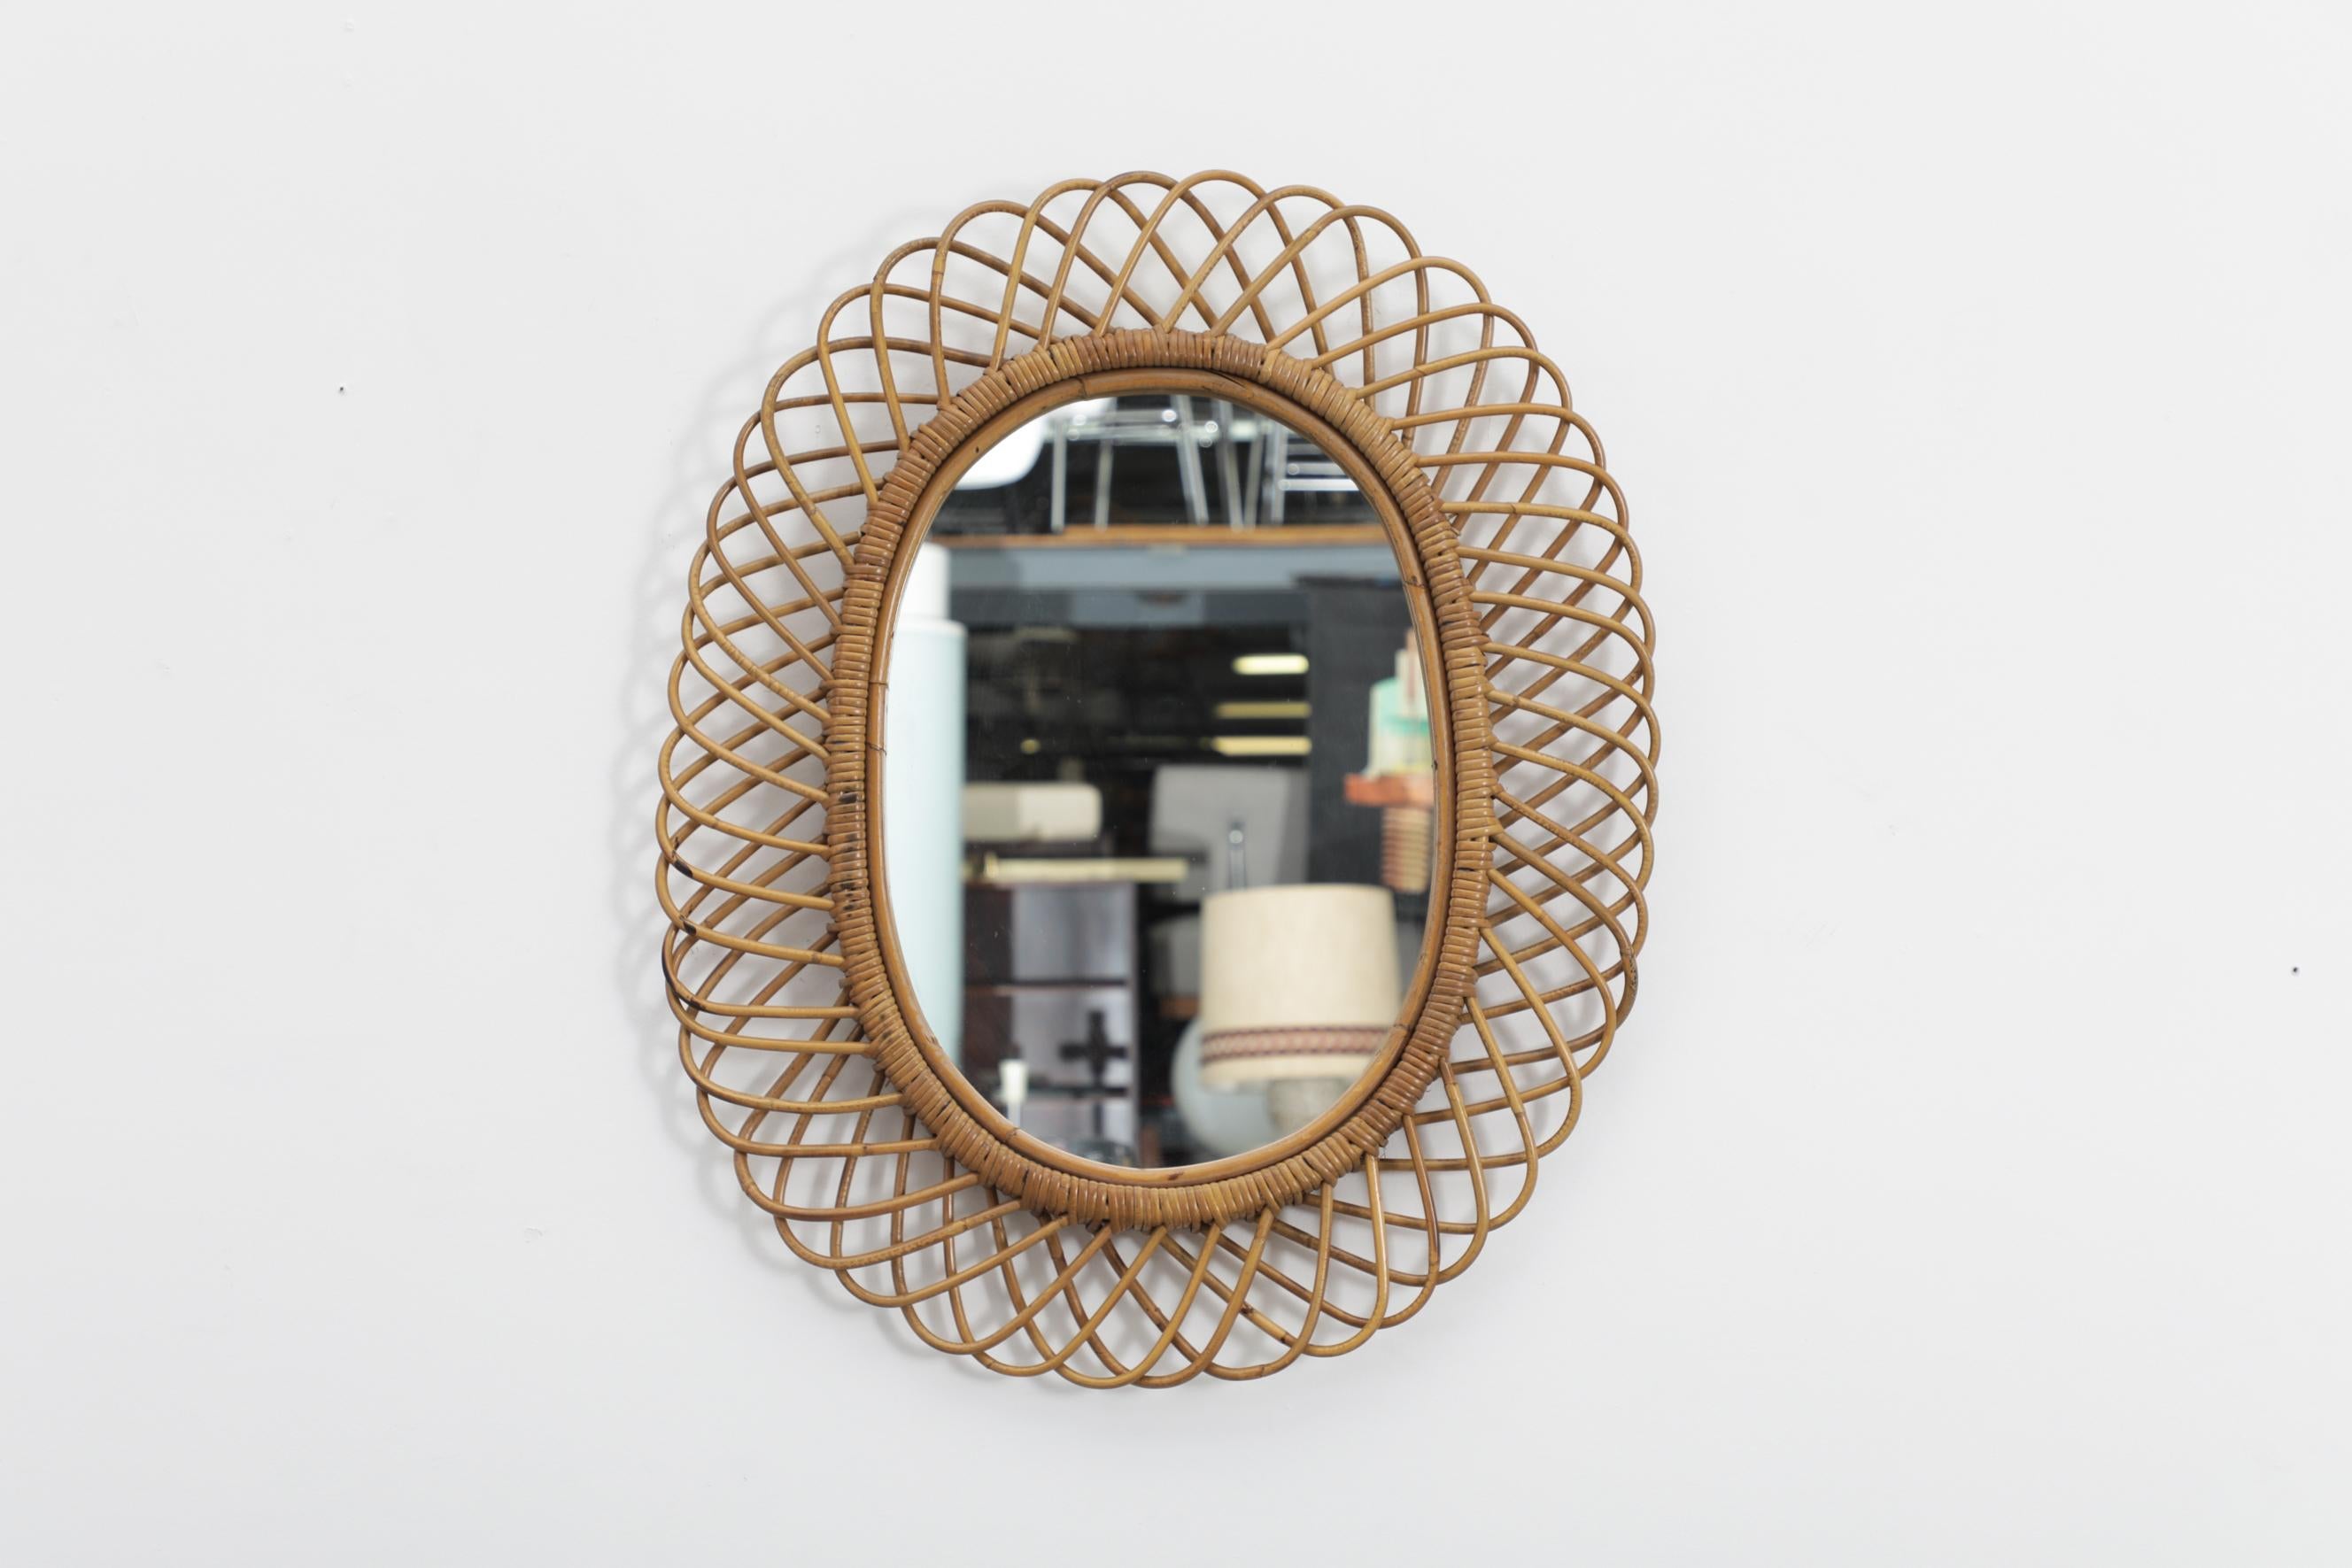 Woven bamboo framed mid-century mirror. Hand made and delicately shaped. Three available, all in similar original condition with minimal wear and breakage., consistent with their age and use. The mirror without the frame measures 13.875 x 20. Other